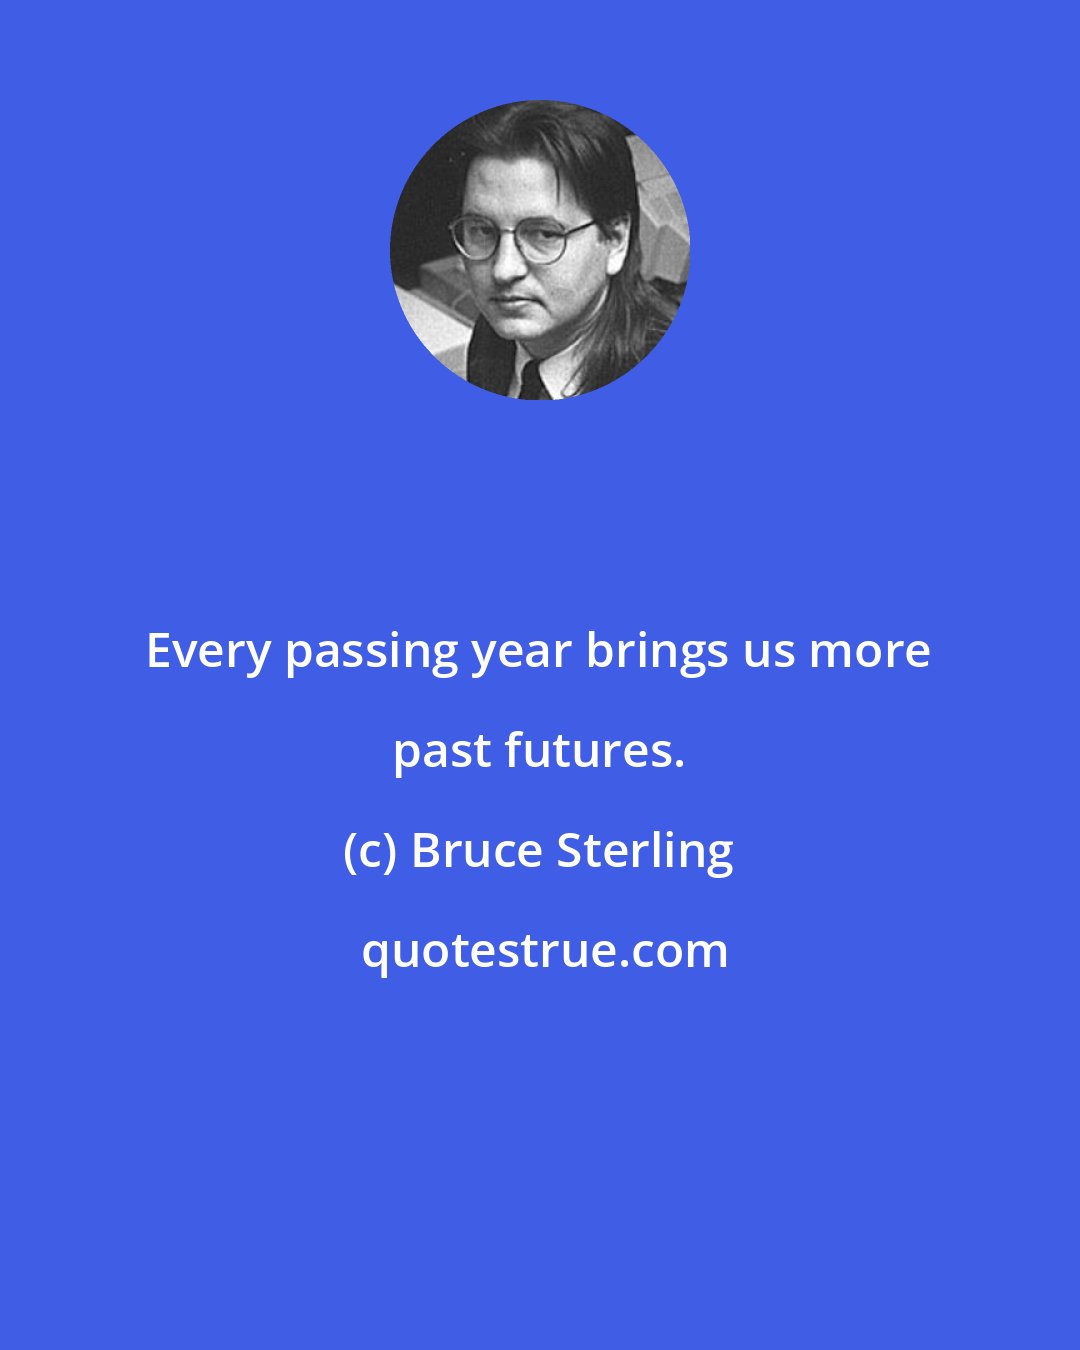 Bruce Sterling: Every passing year brings us more past futures.